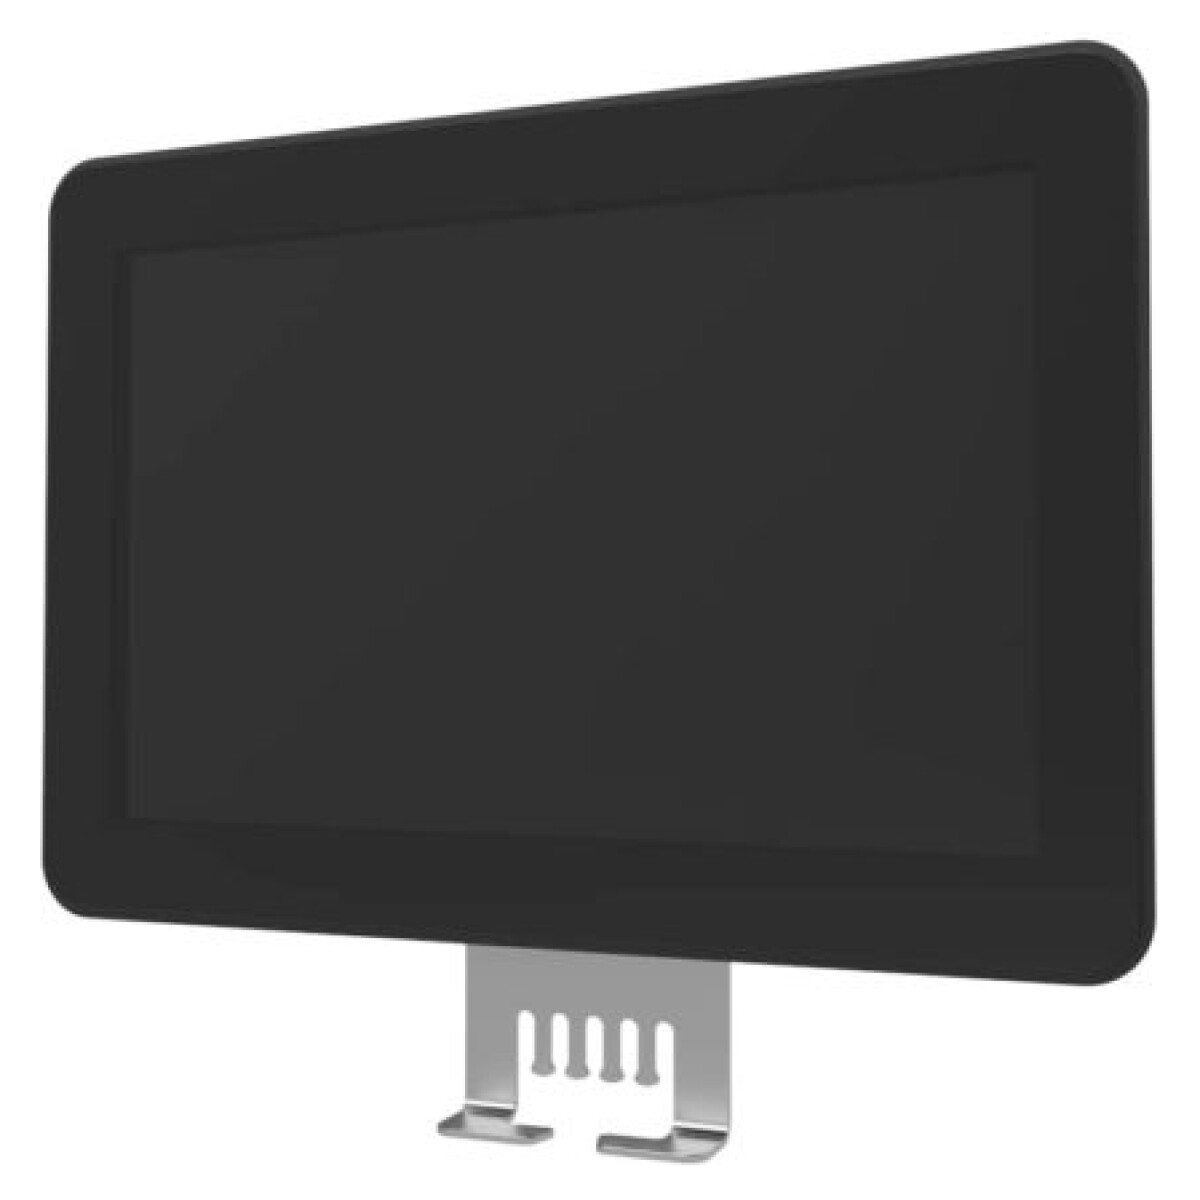  Microtouch OF-100P-A1 - 10.1in PCAP Open Frame